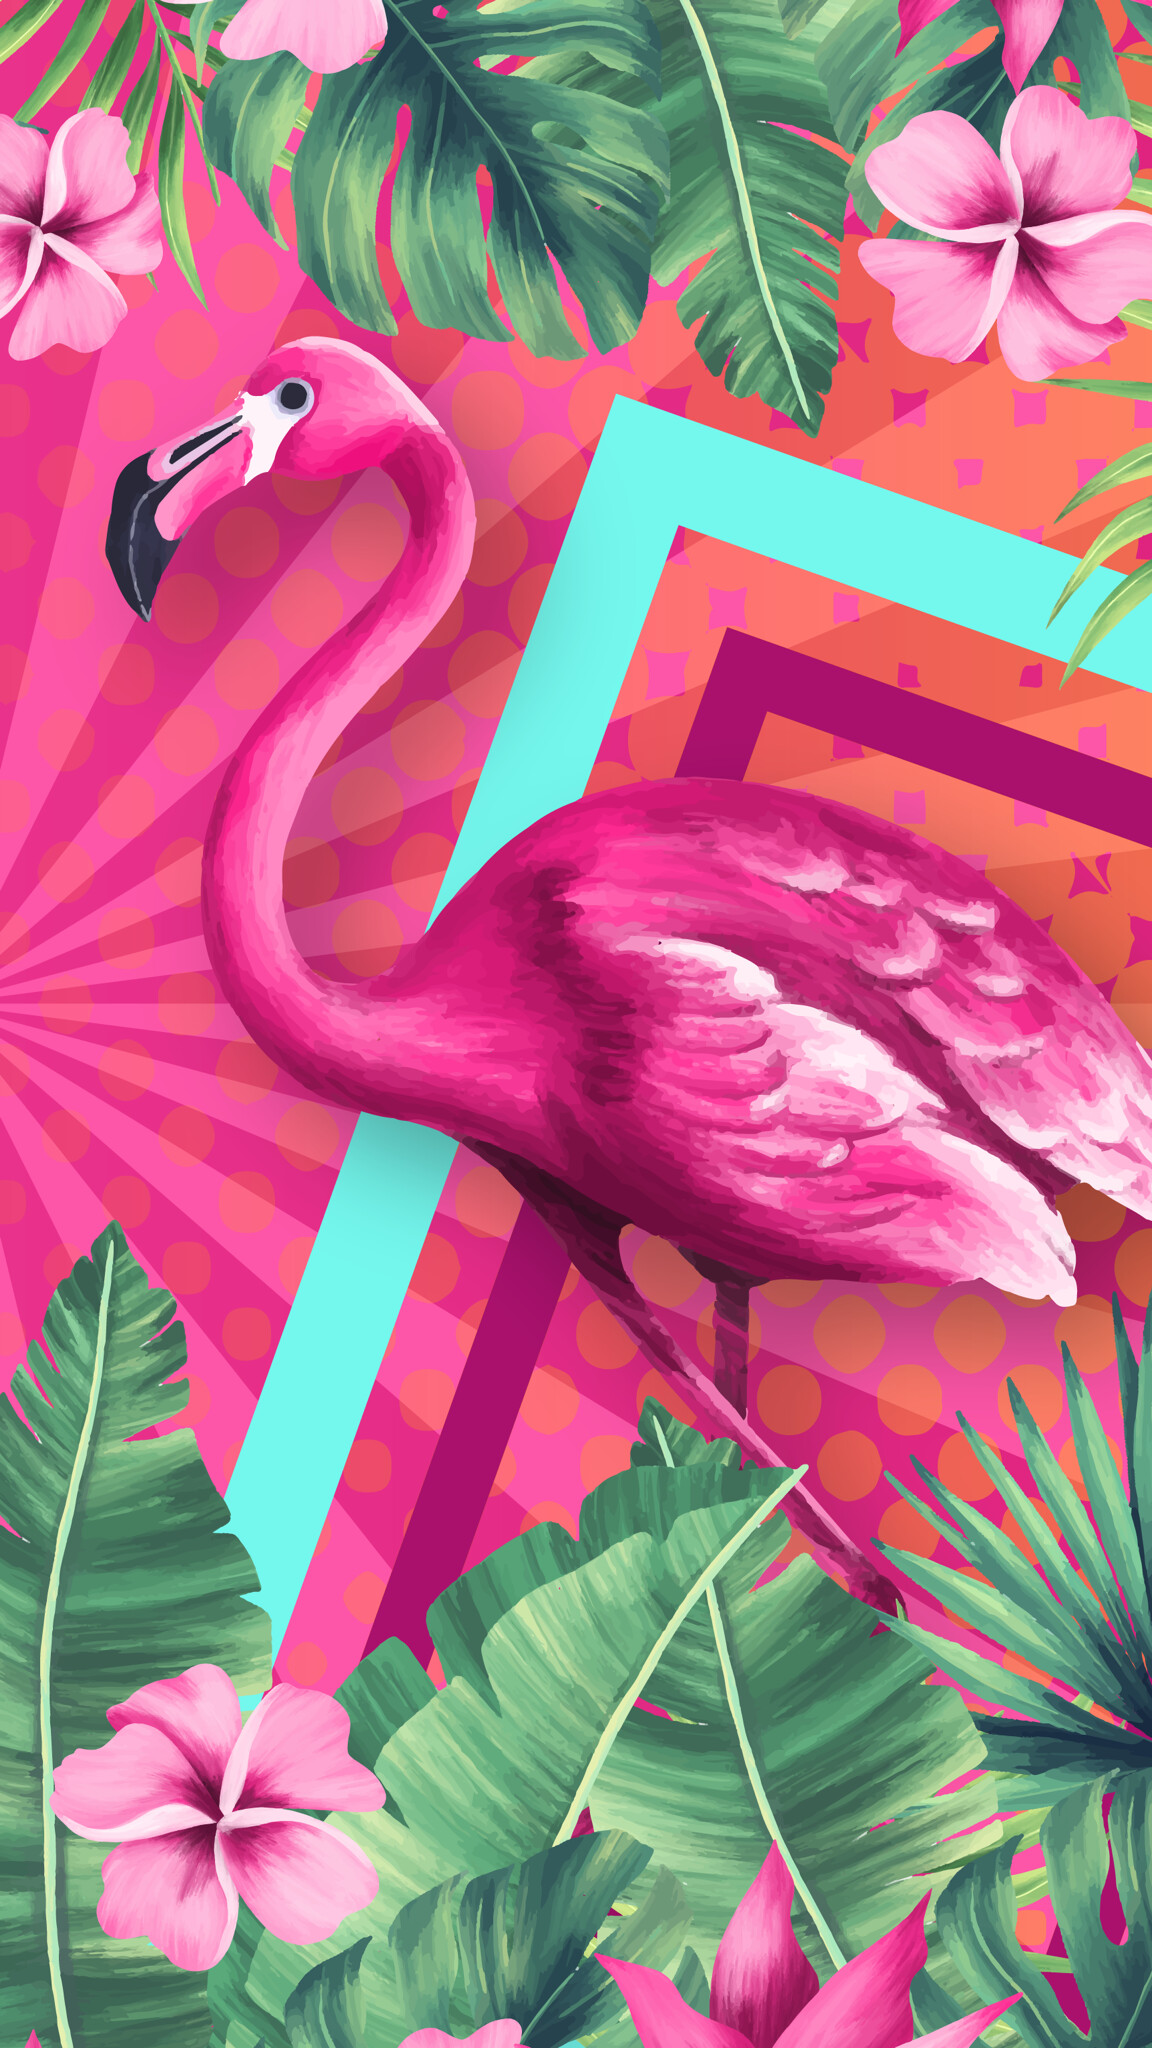 Flamingo: Known for their long legs and striking bright pink feathers. 1160x2050 HD Background.